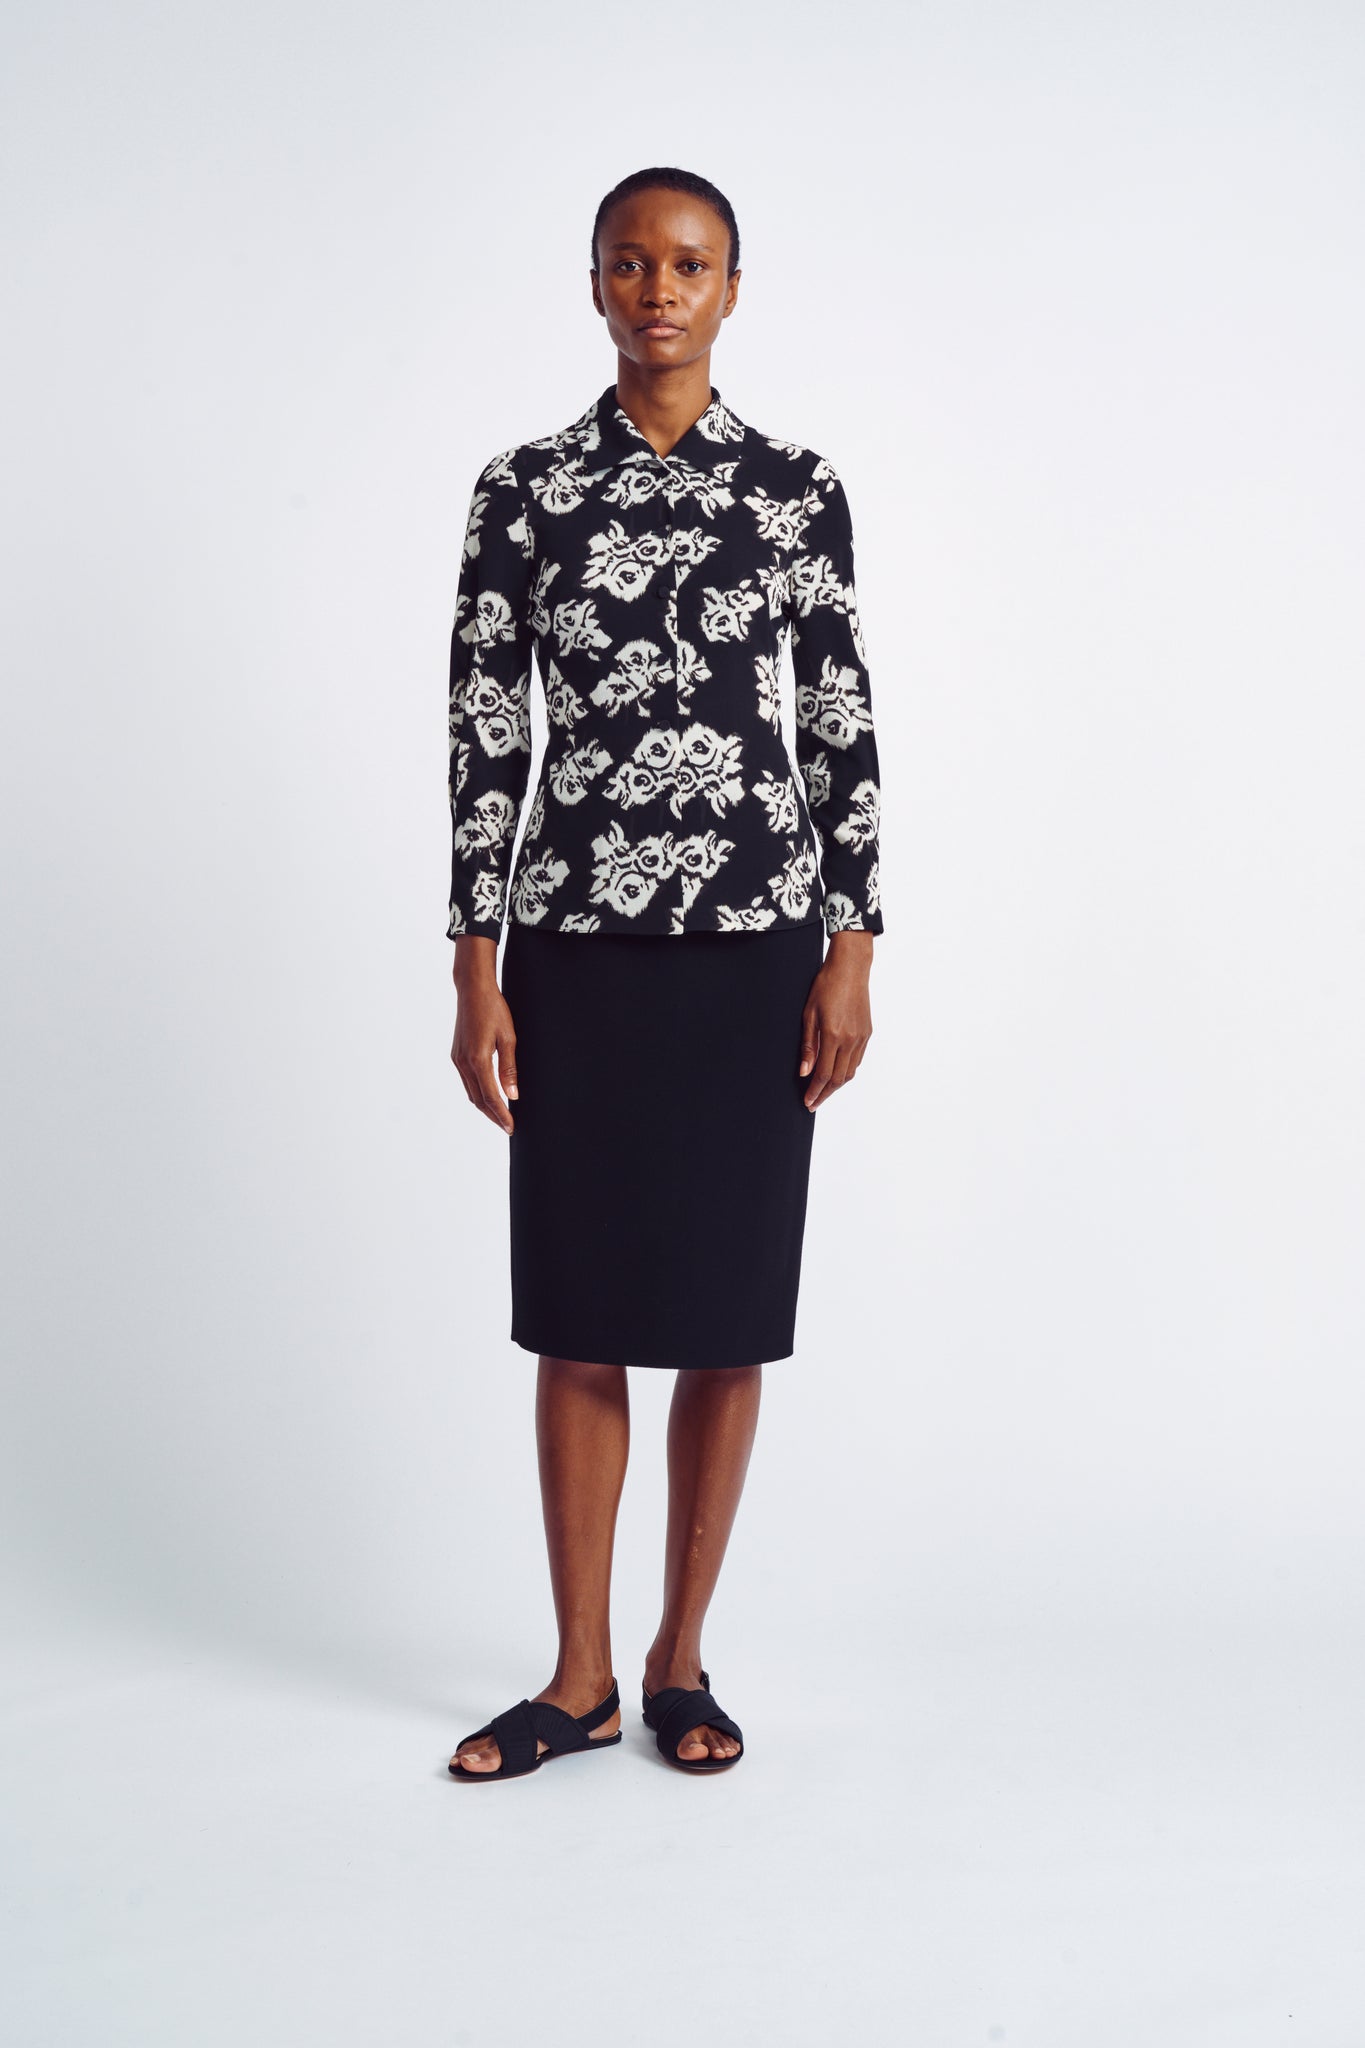 Paulie Top | Black and White Floral Printed Crepe Shirt | Emilia Wickstead